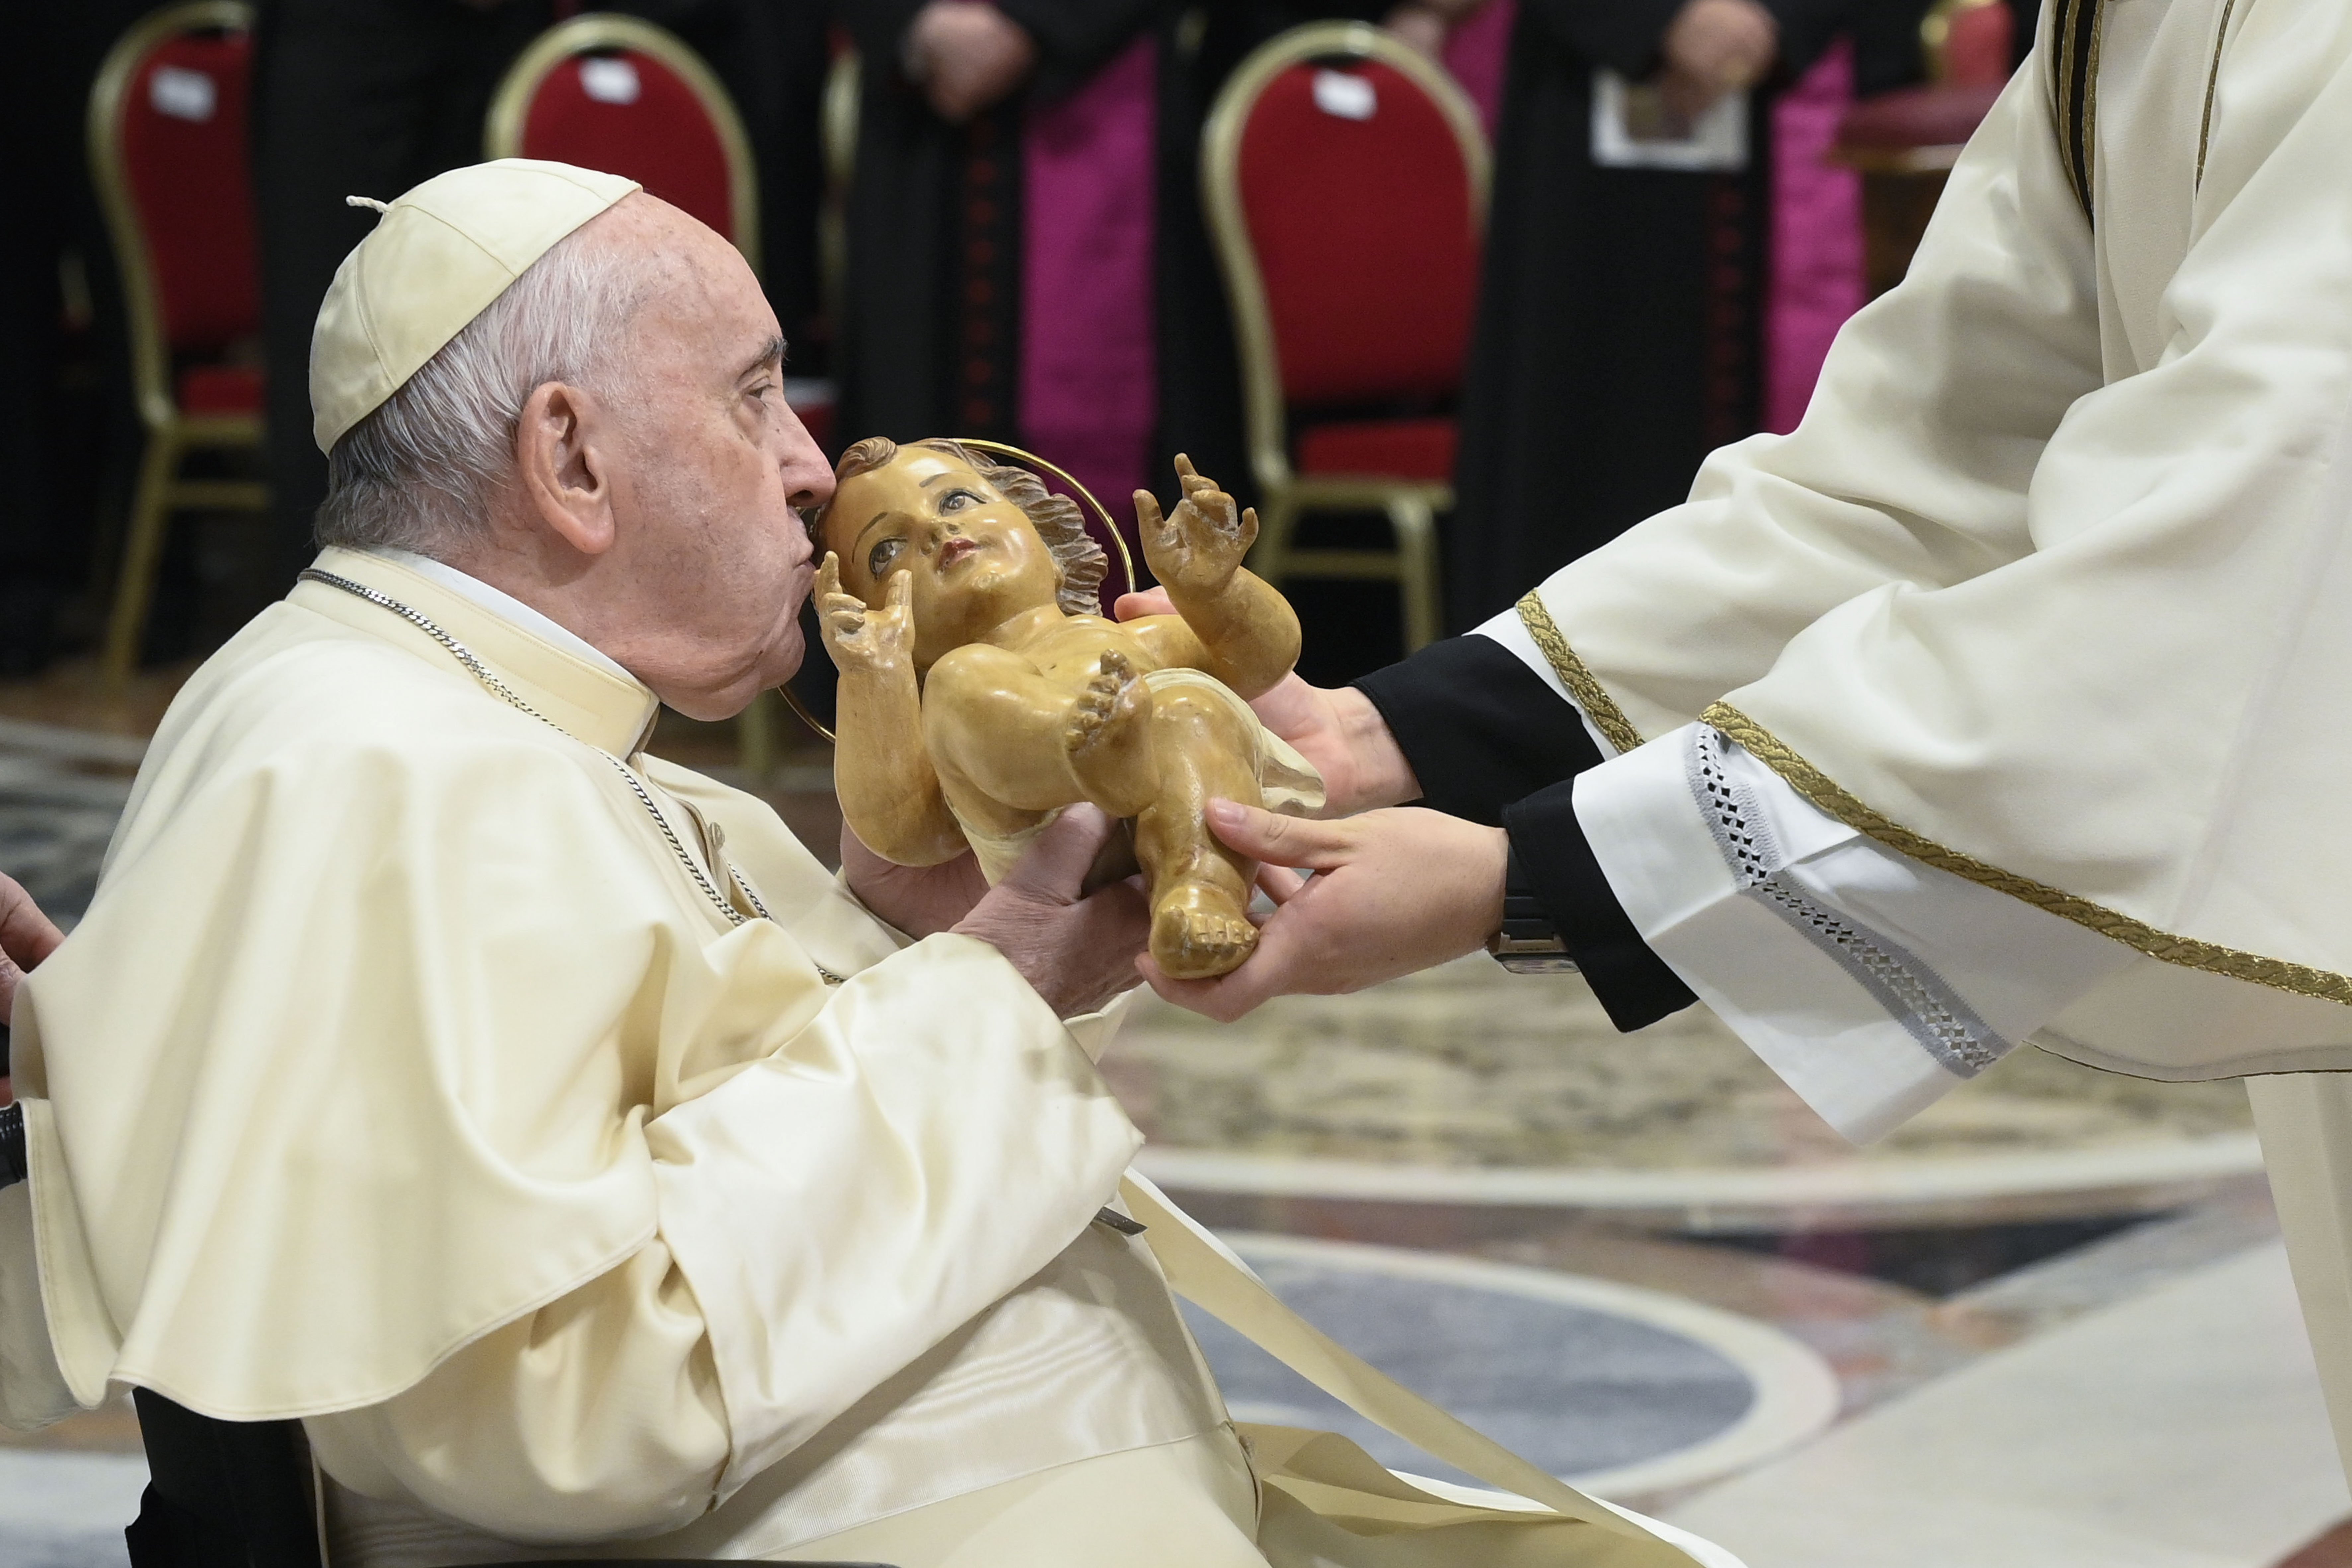 Pope Francis kisses a figurine of the baby Jesus during Christmas Eve Mass in St. Peter's Basilica at the Vatican Dec. 24, 2022. (CNS photo/Vatican Media)